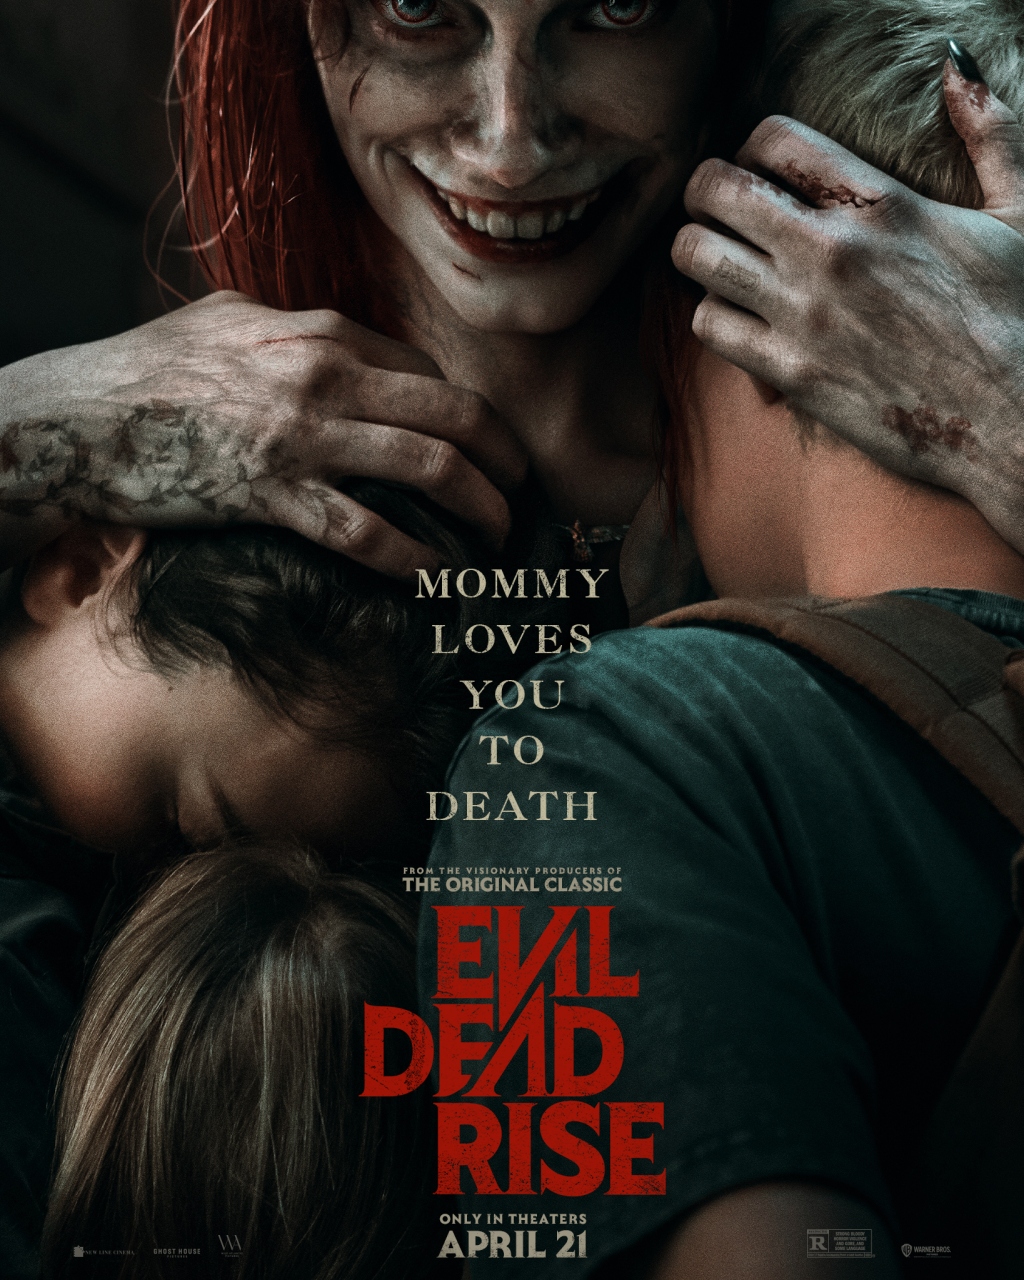 Movie News: Evil Dead Rise Official Red Band Trailer Reaction